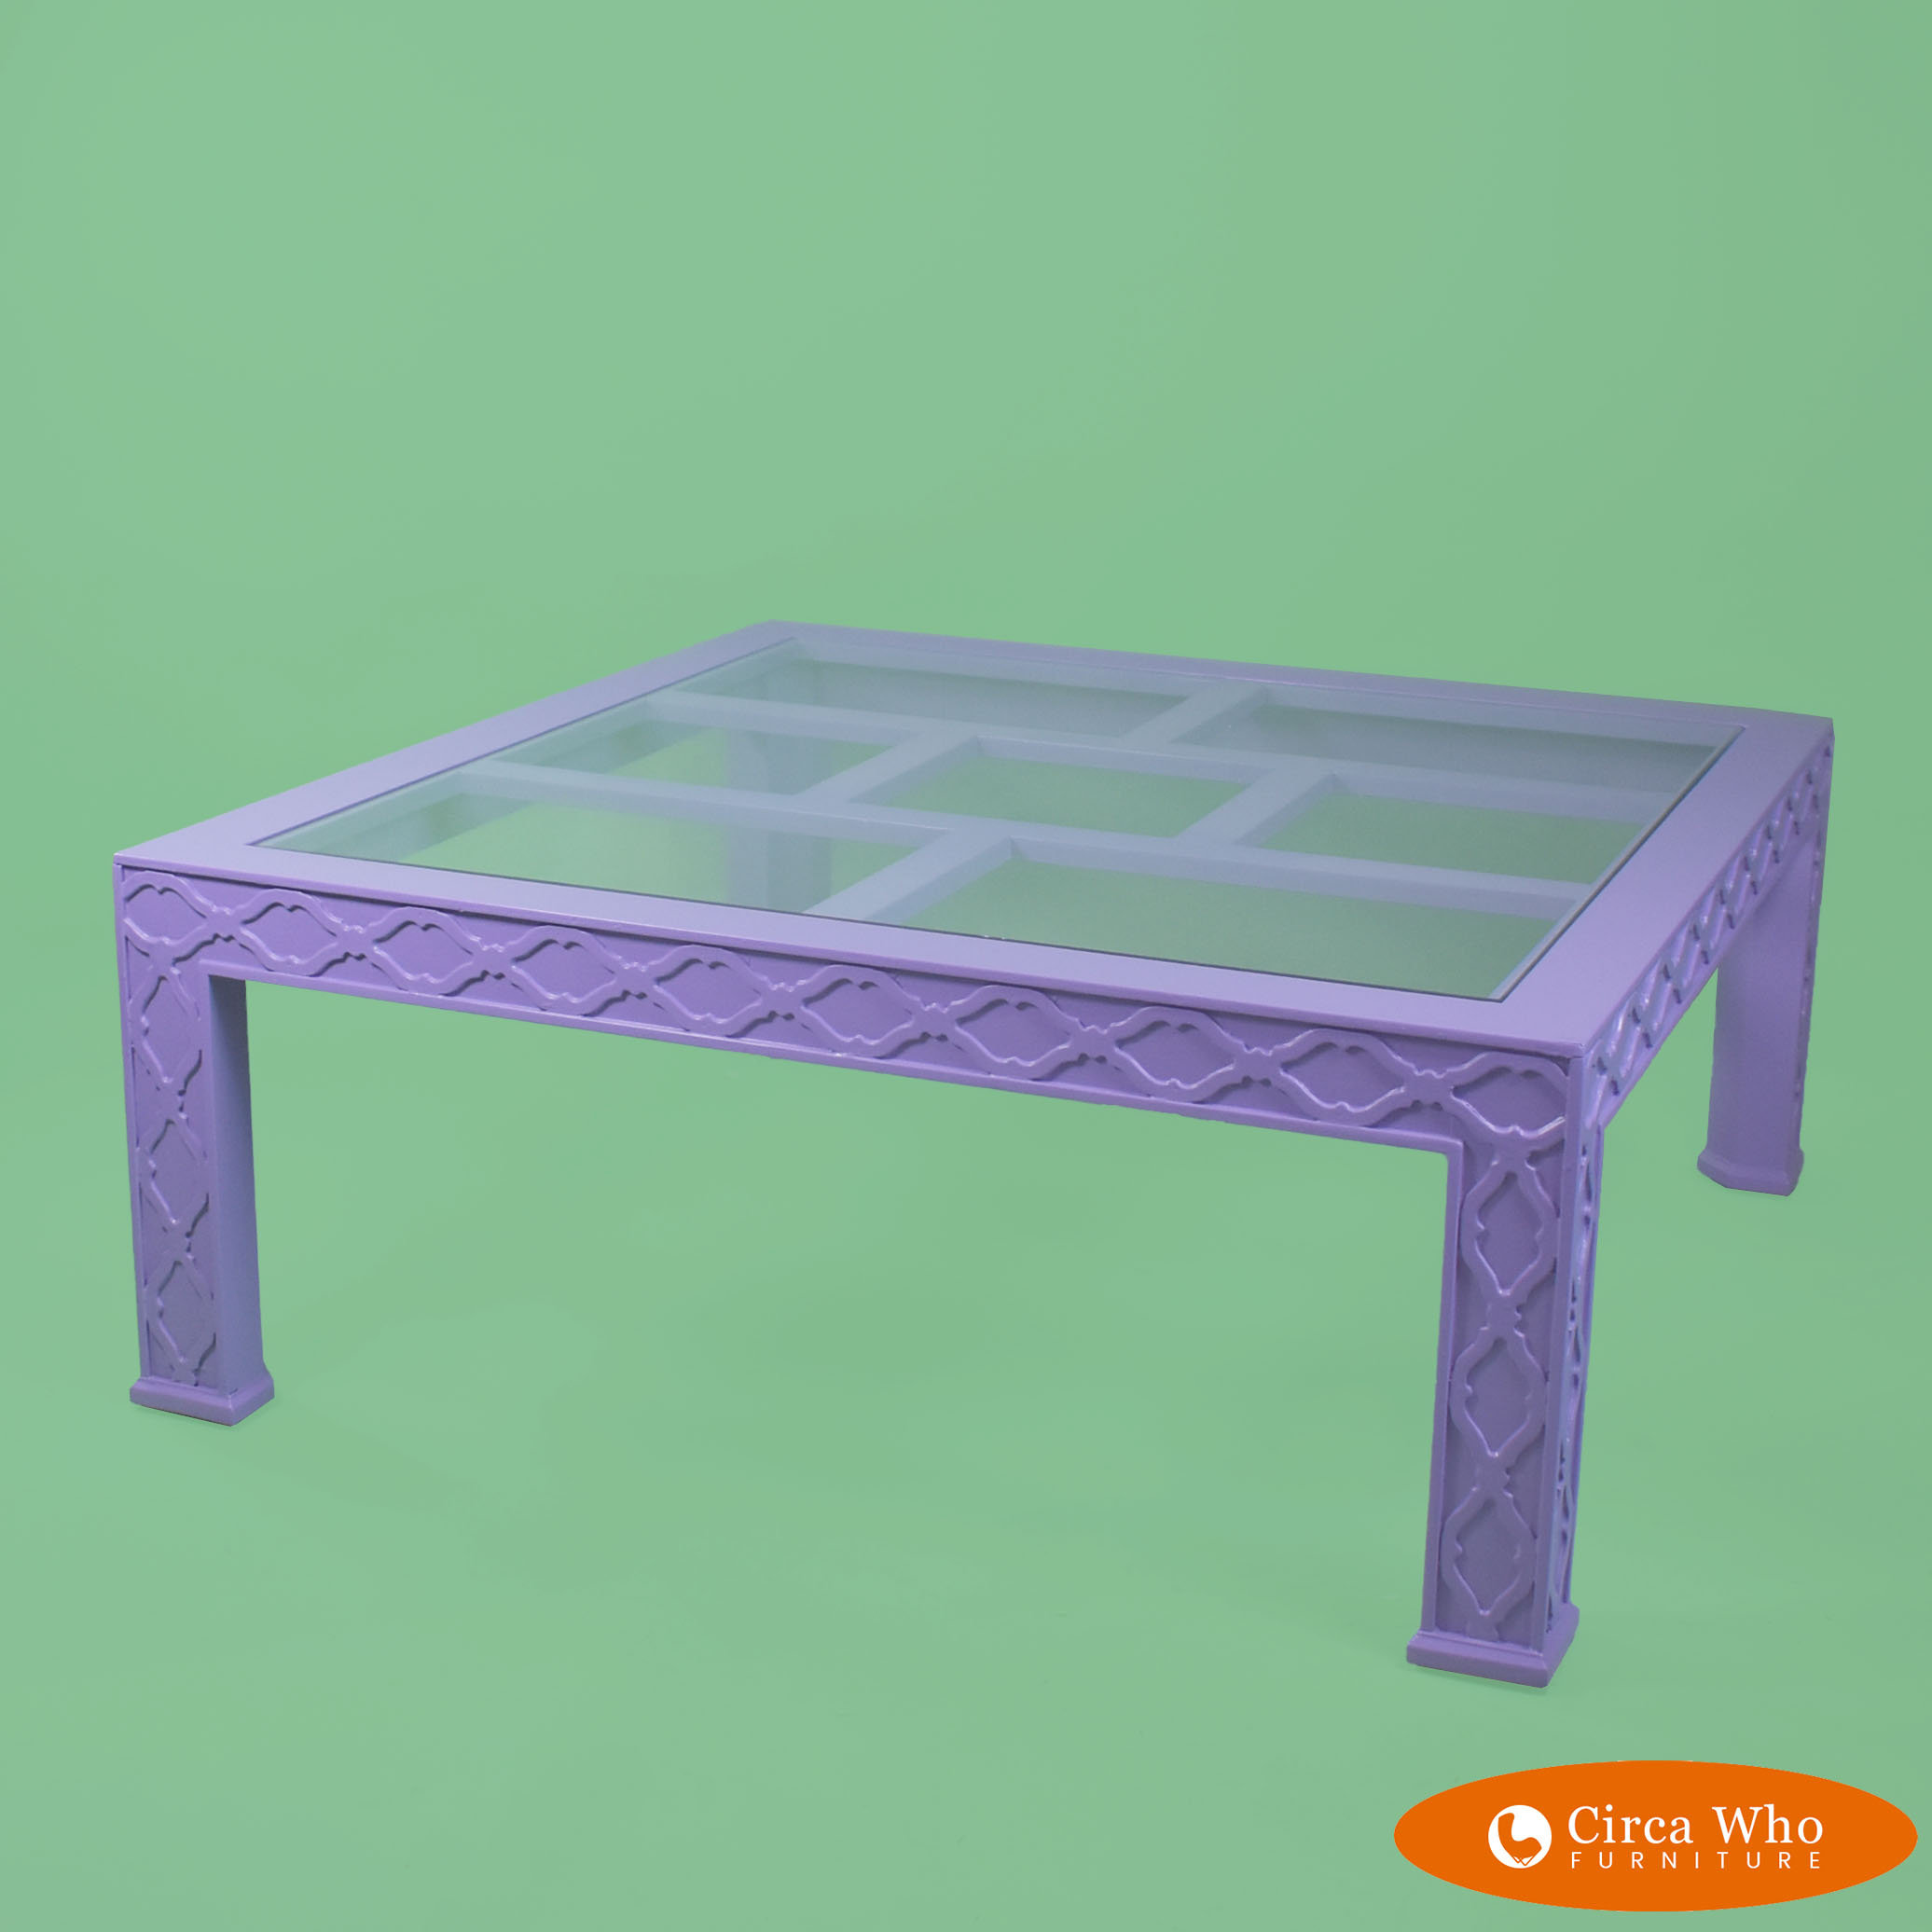 Hollywood Regency Fretwork Square Coffee Table